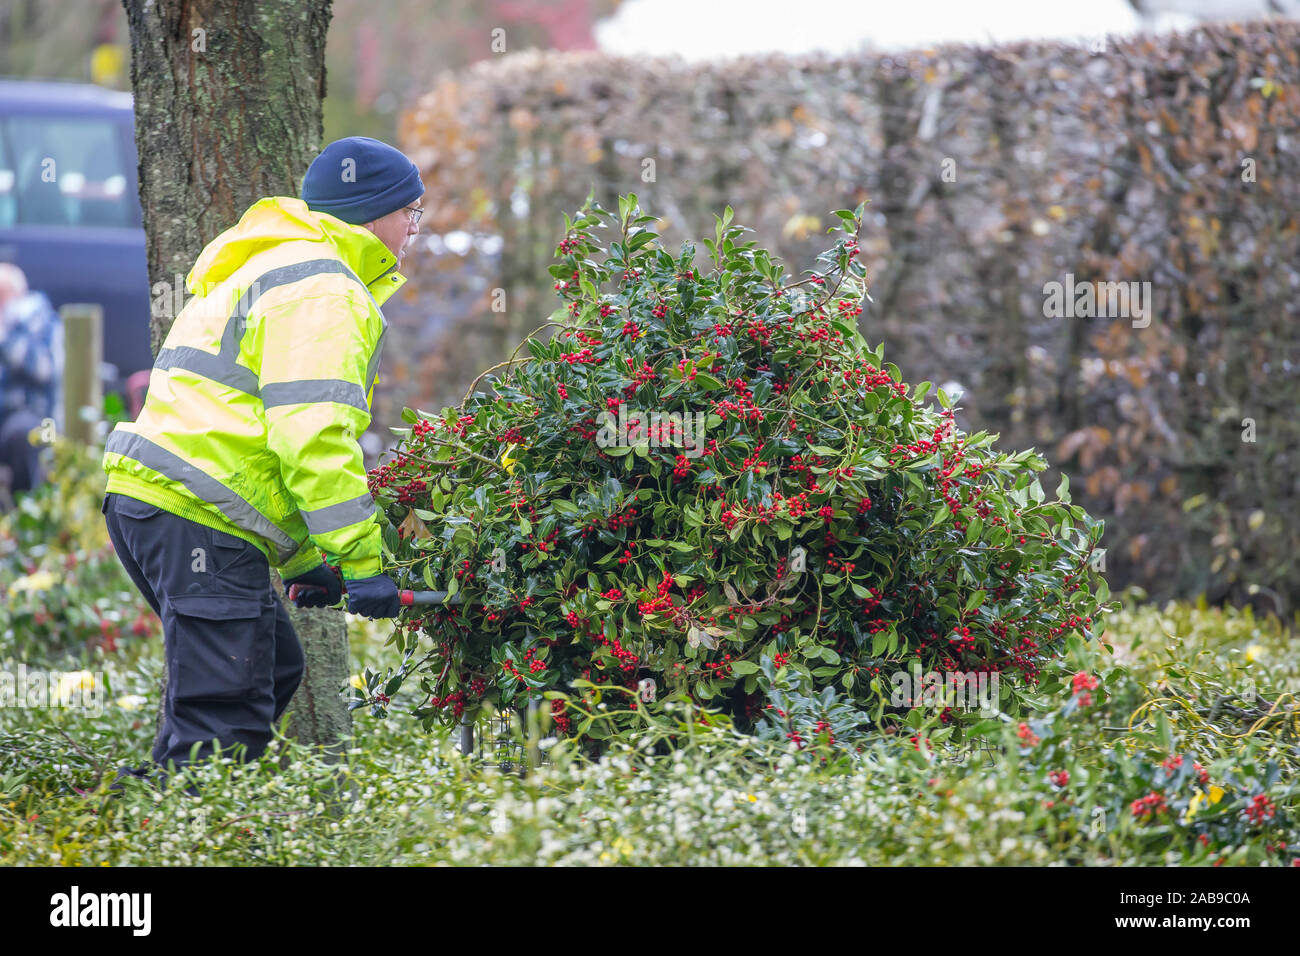 Tenbury Wells, UK. 26th Nov, 2019. In spite of wet and dreary weather, nothing dampens the spirit of these UK buyers as they flock to the Worcestershire town of Tenbury Wells for the annual Mistletoe and Holly Auction. With UK farmers and growers offering such a staggering selection of freshly-cut, berry-laden lots, buyers travel from far & wide to secure the finest festive foliage for their business' countdown to Christmas. Happy retailers return to their vehicles, trollies overflowing with successful purchases of premium evergreens! Credit: Lee Hudson/Alamy Live News Stock Photo